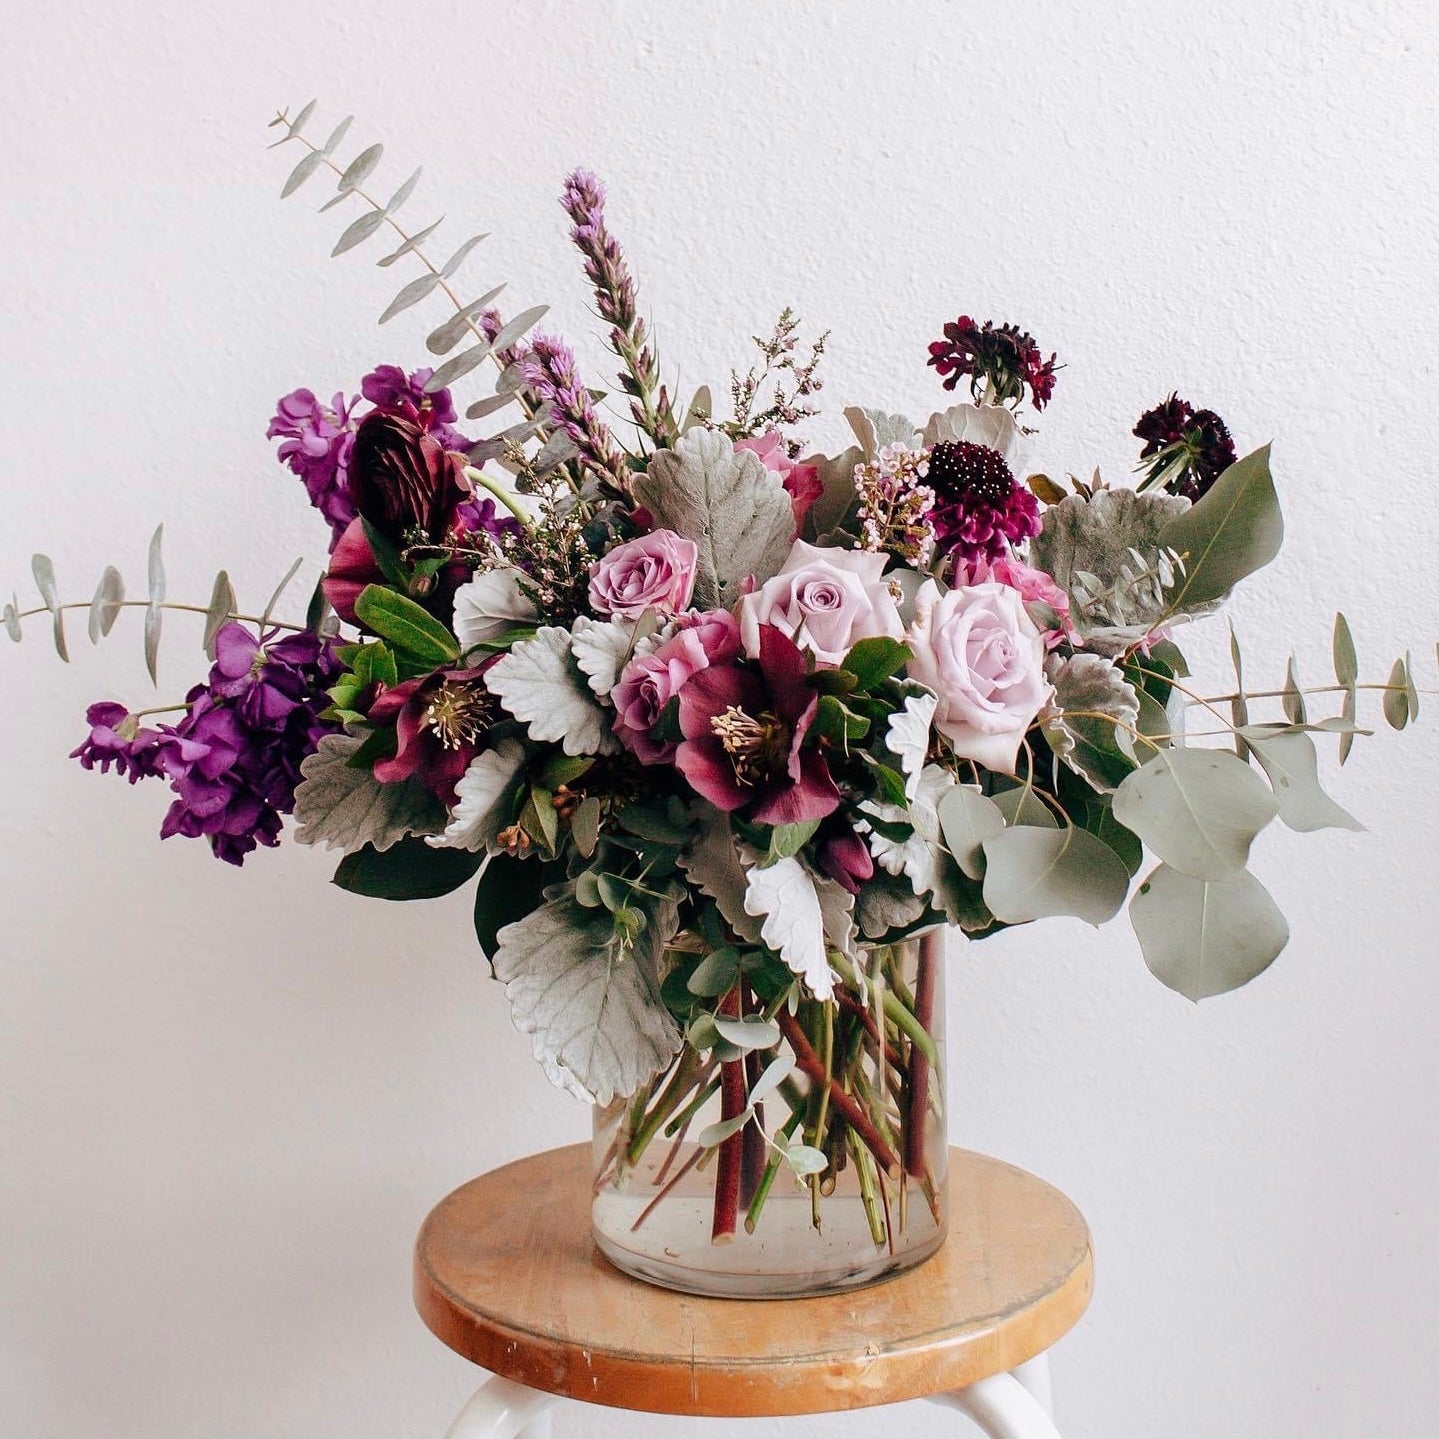 How to use floral foam — Botany Studio